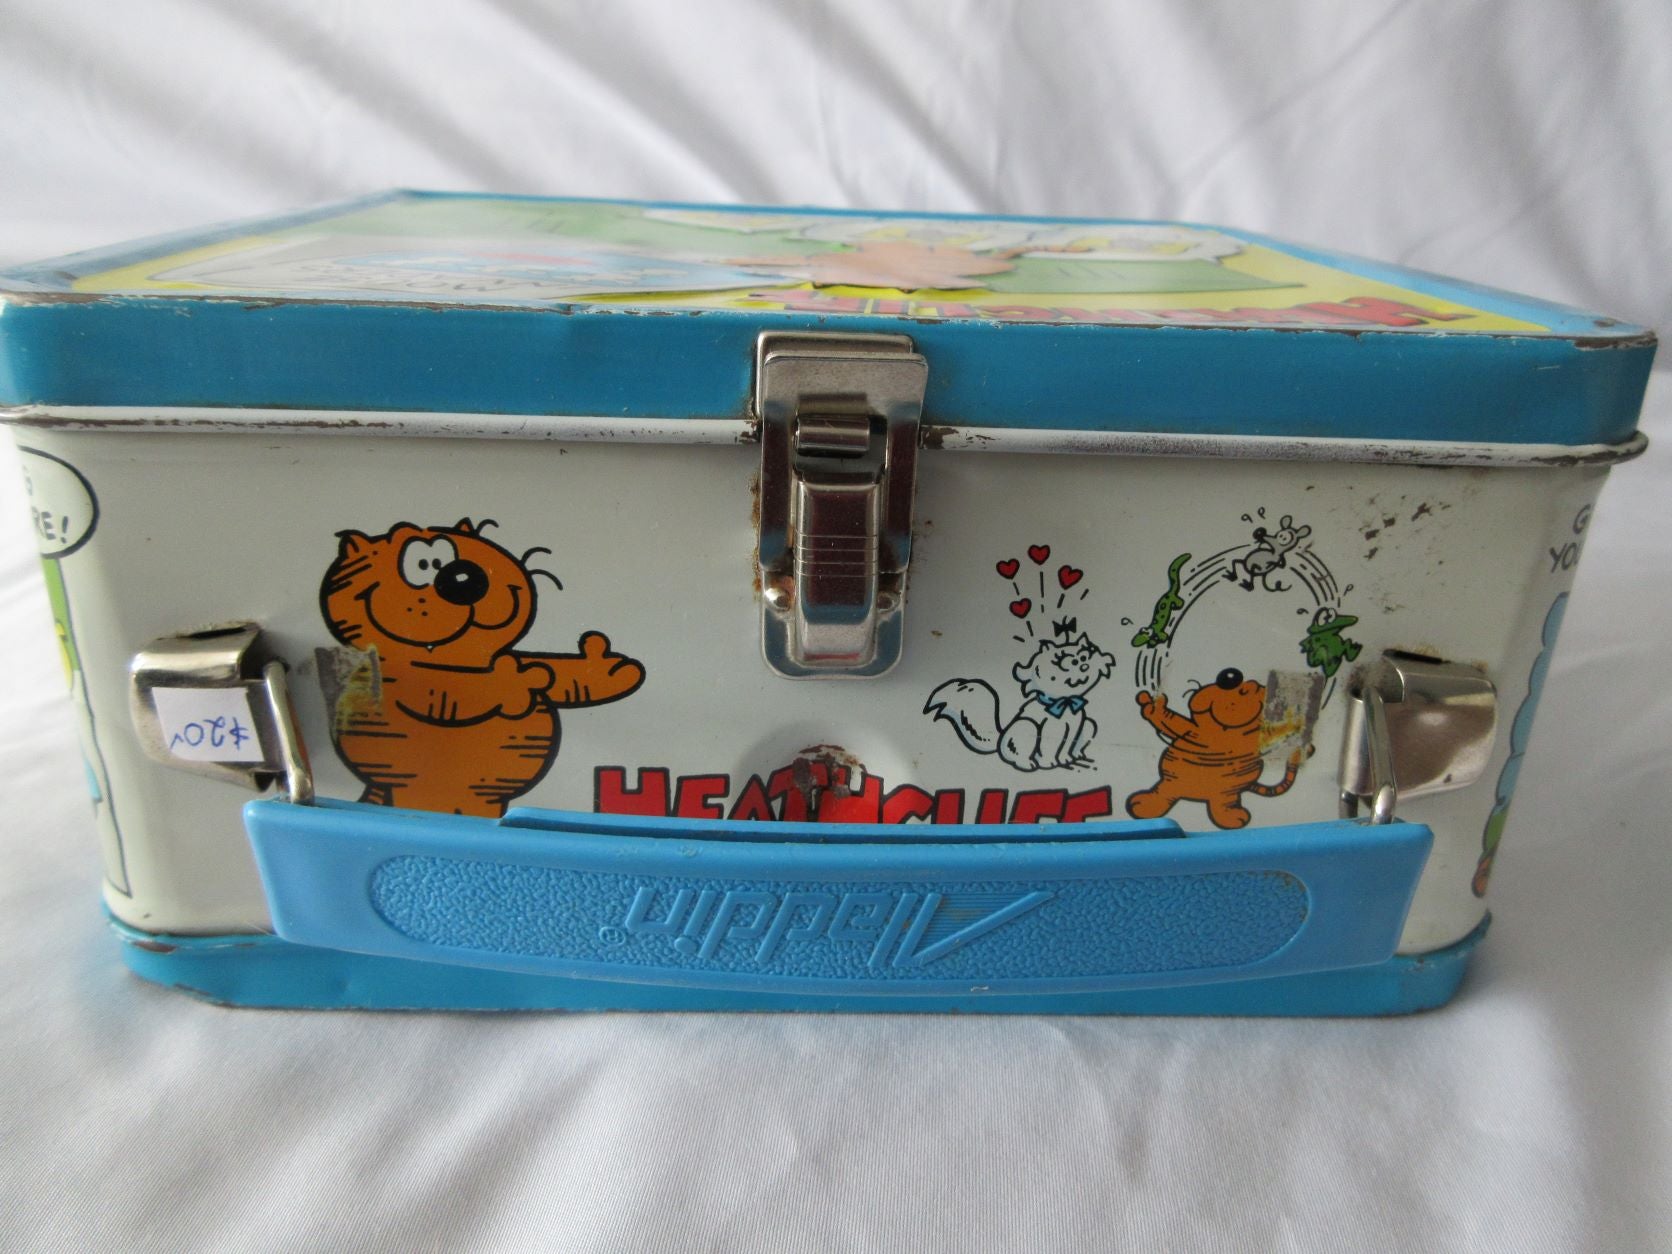 Collectible Heathcliff Metal Lunch Box